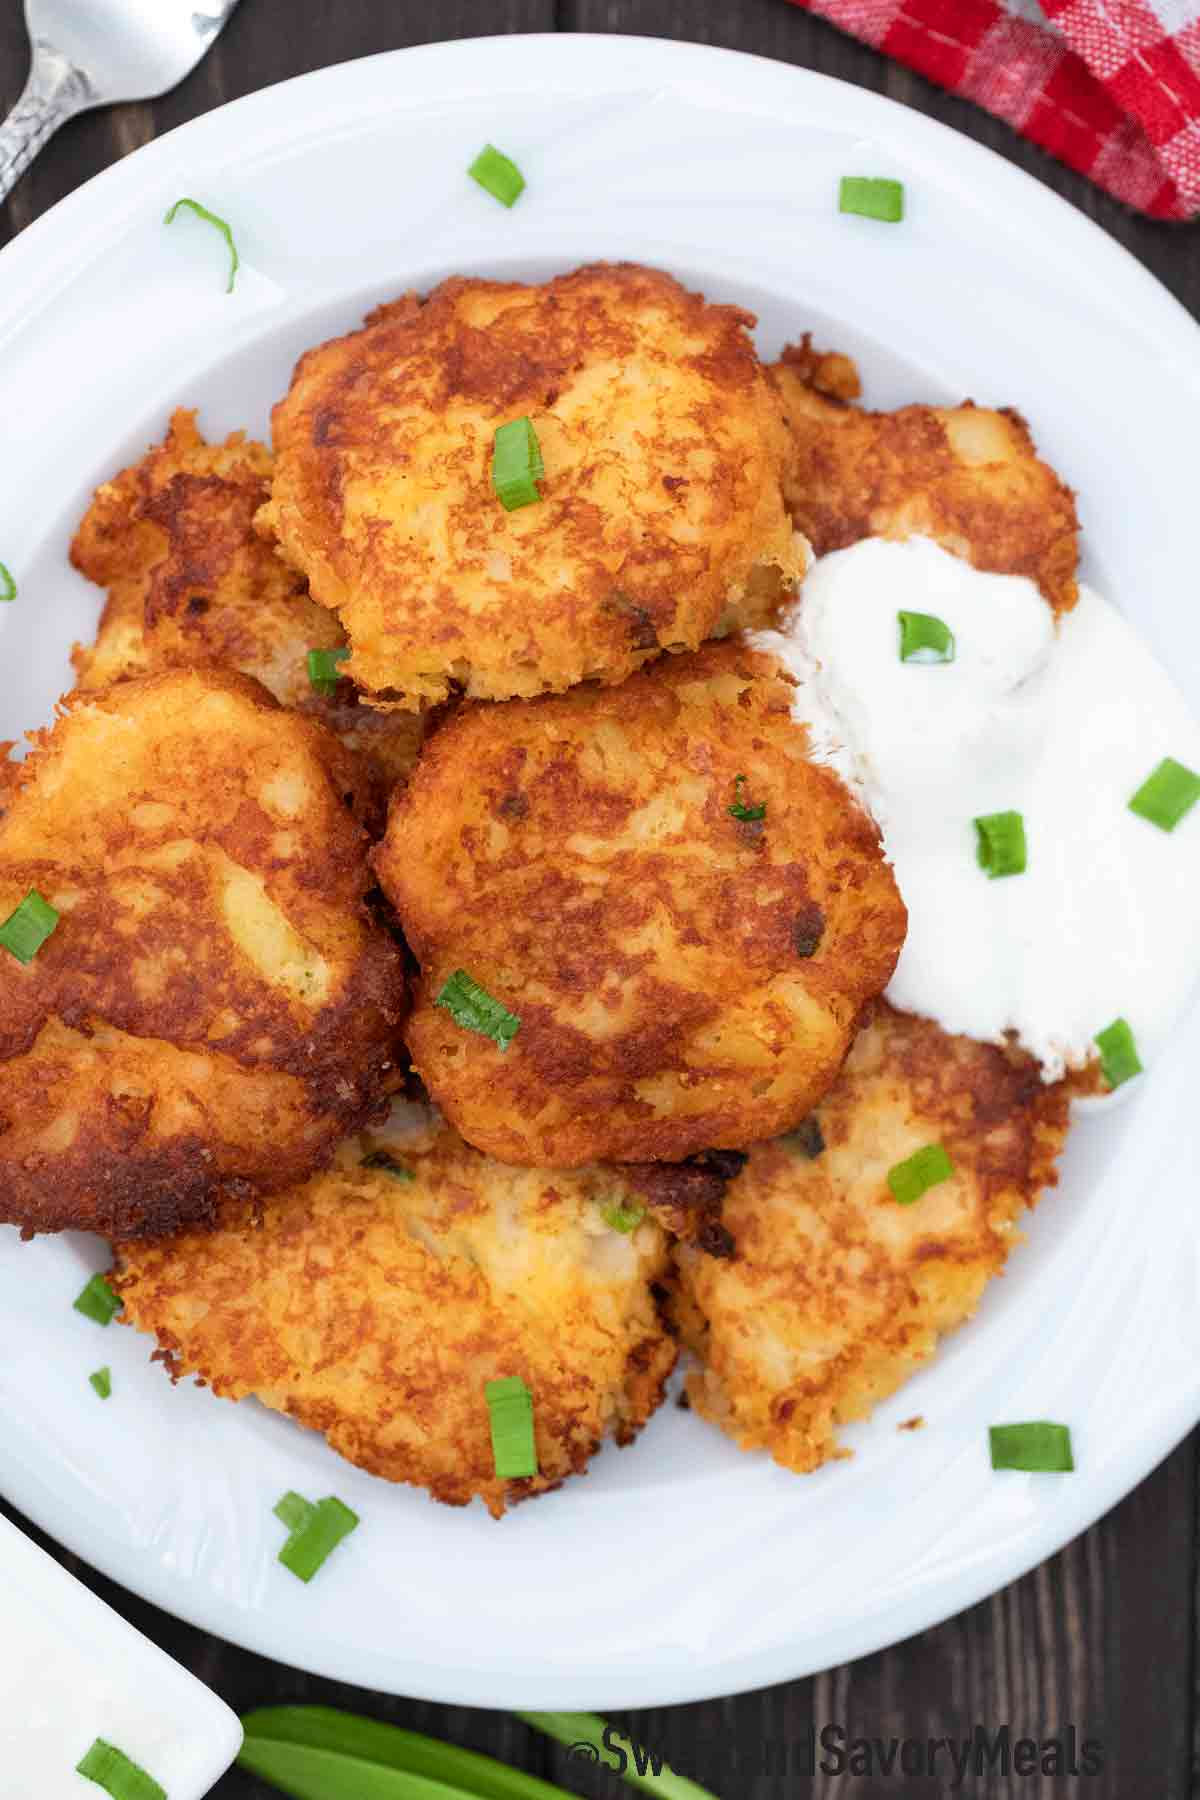 Loaded Mashed Potato Pancakes [Video] - Sweet and Savory Meals